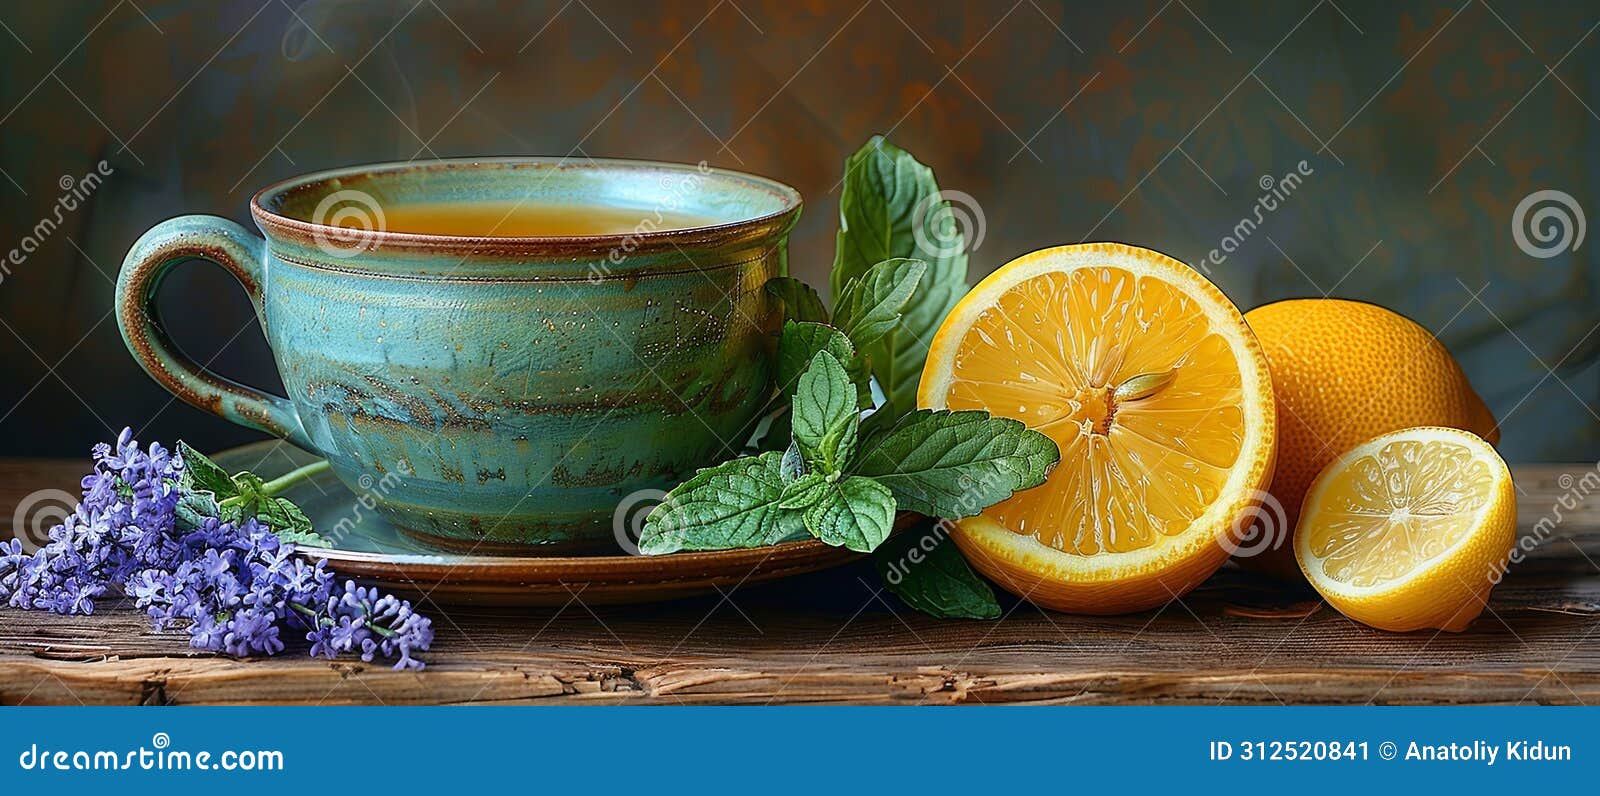 a cup of green tea, herbs and some lemons on wooden table, in the style of violet and amber, baroque grandiosity